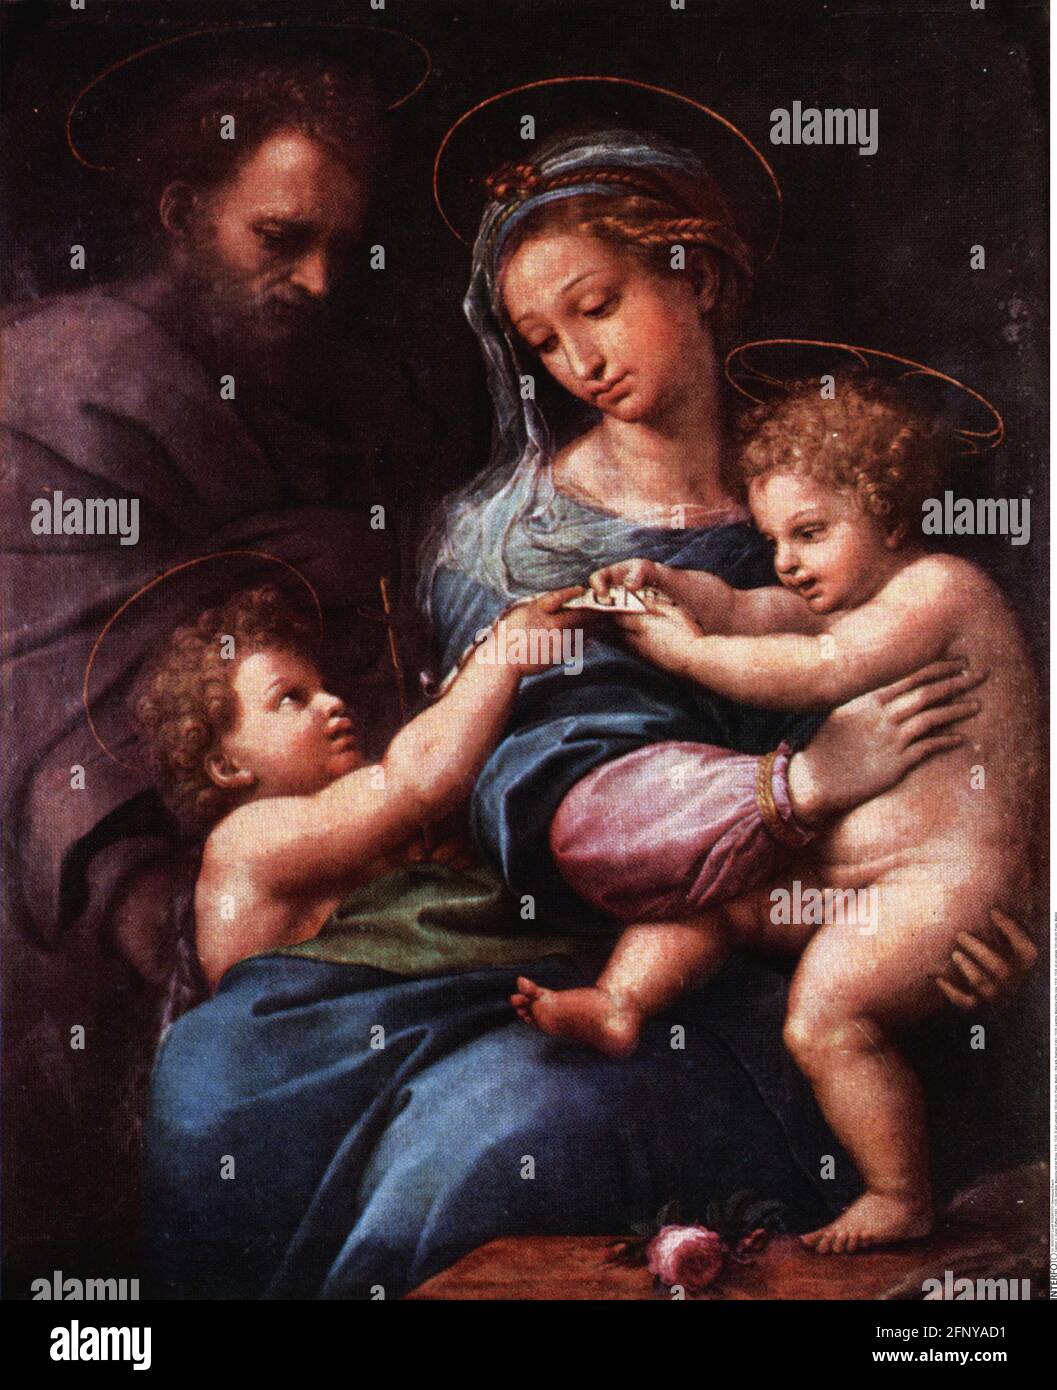 fine arts, Raphael (1483 - 1520), painting, Madonna of the rose, 1518 - 1520, oil on canvas, 103 x 84 cm, ARTIST'S COPYRIGHT HAS NOT TO BE CLEARED Stock Photo